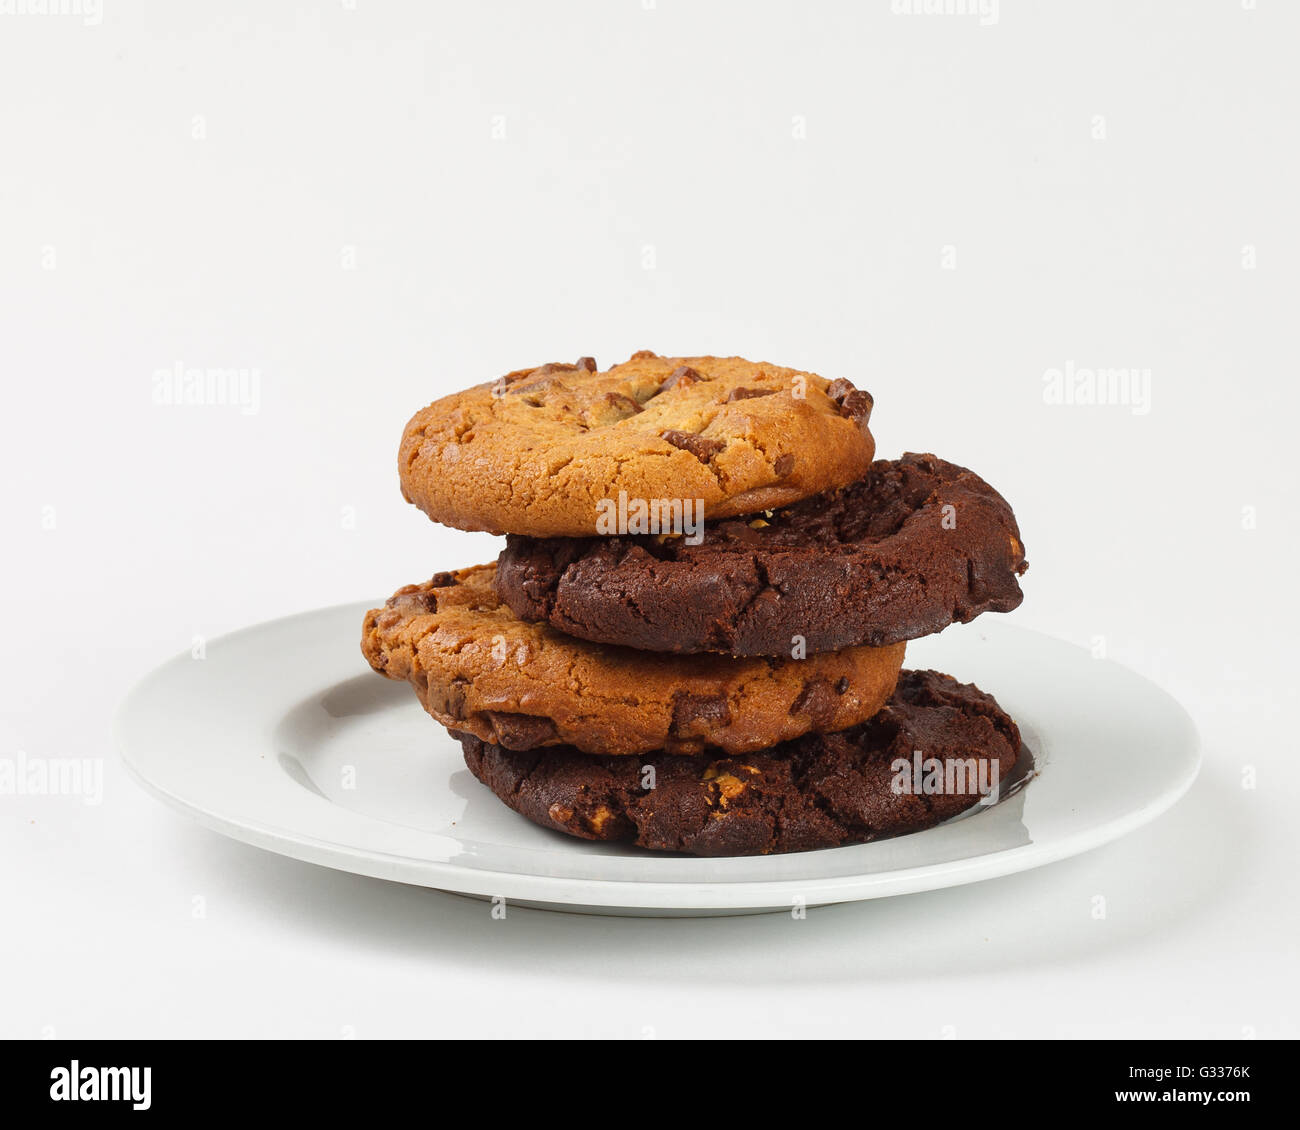 Cookies biscuit with chocolate chips on the plate on white background. Close up side view. Stock Photo